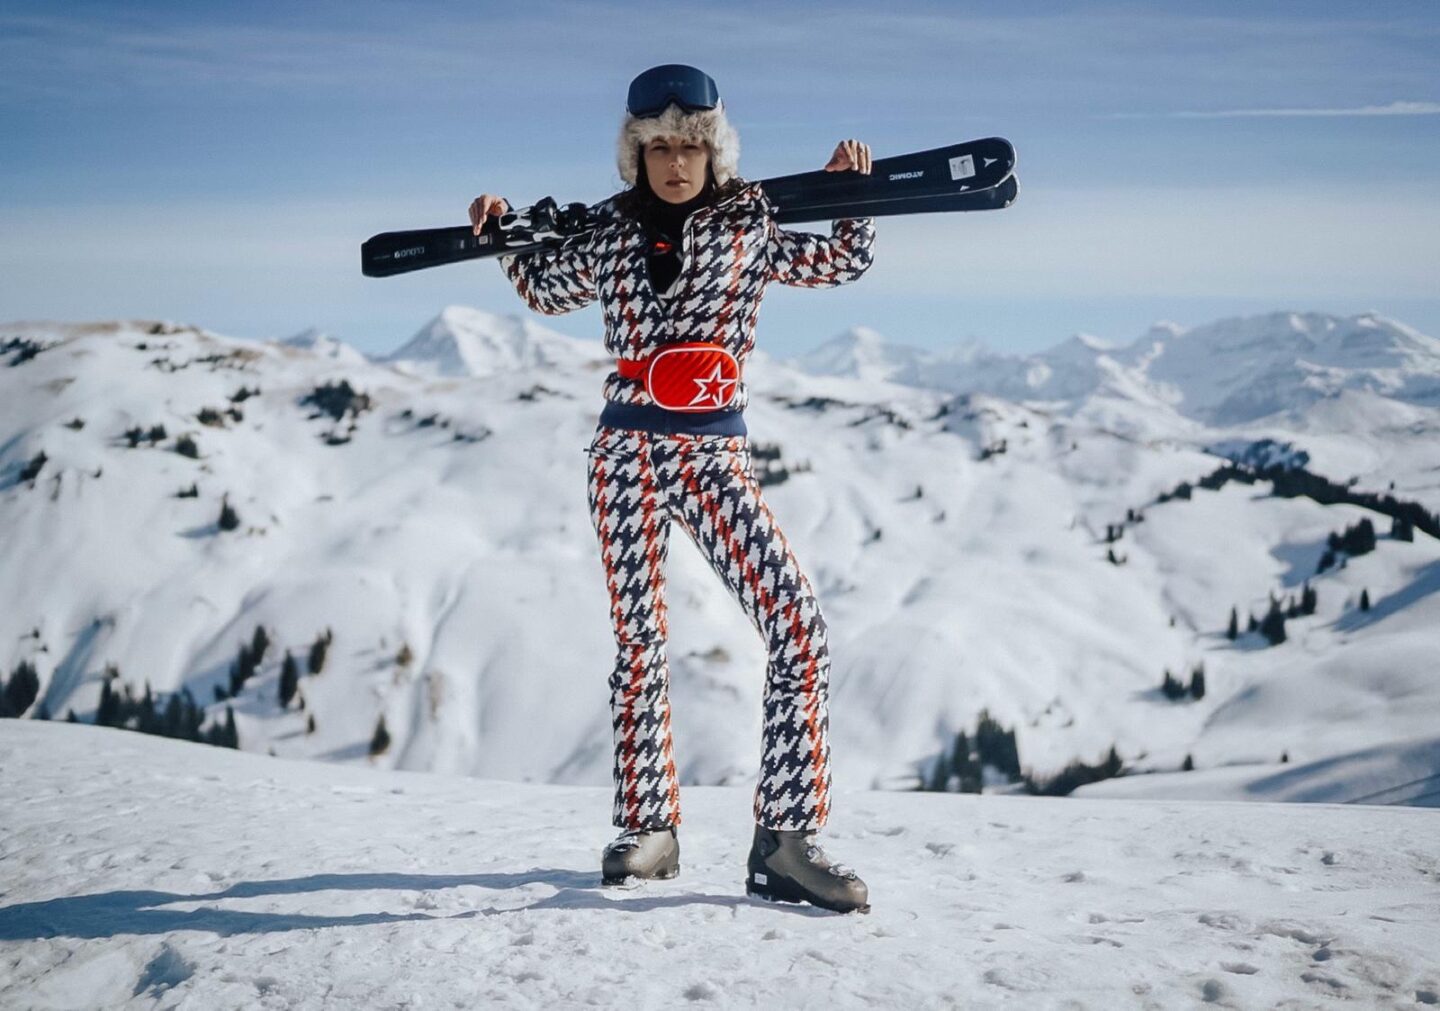 Best Ski Fashion Outfits This Winter by CHIC ICON - The Chic Icon